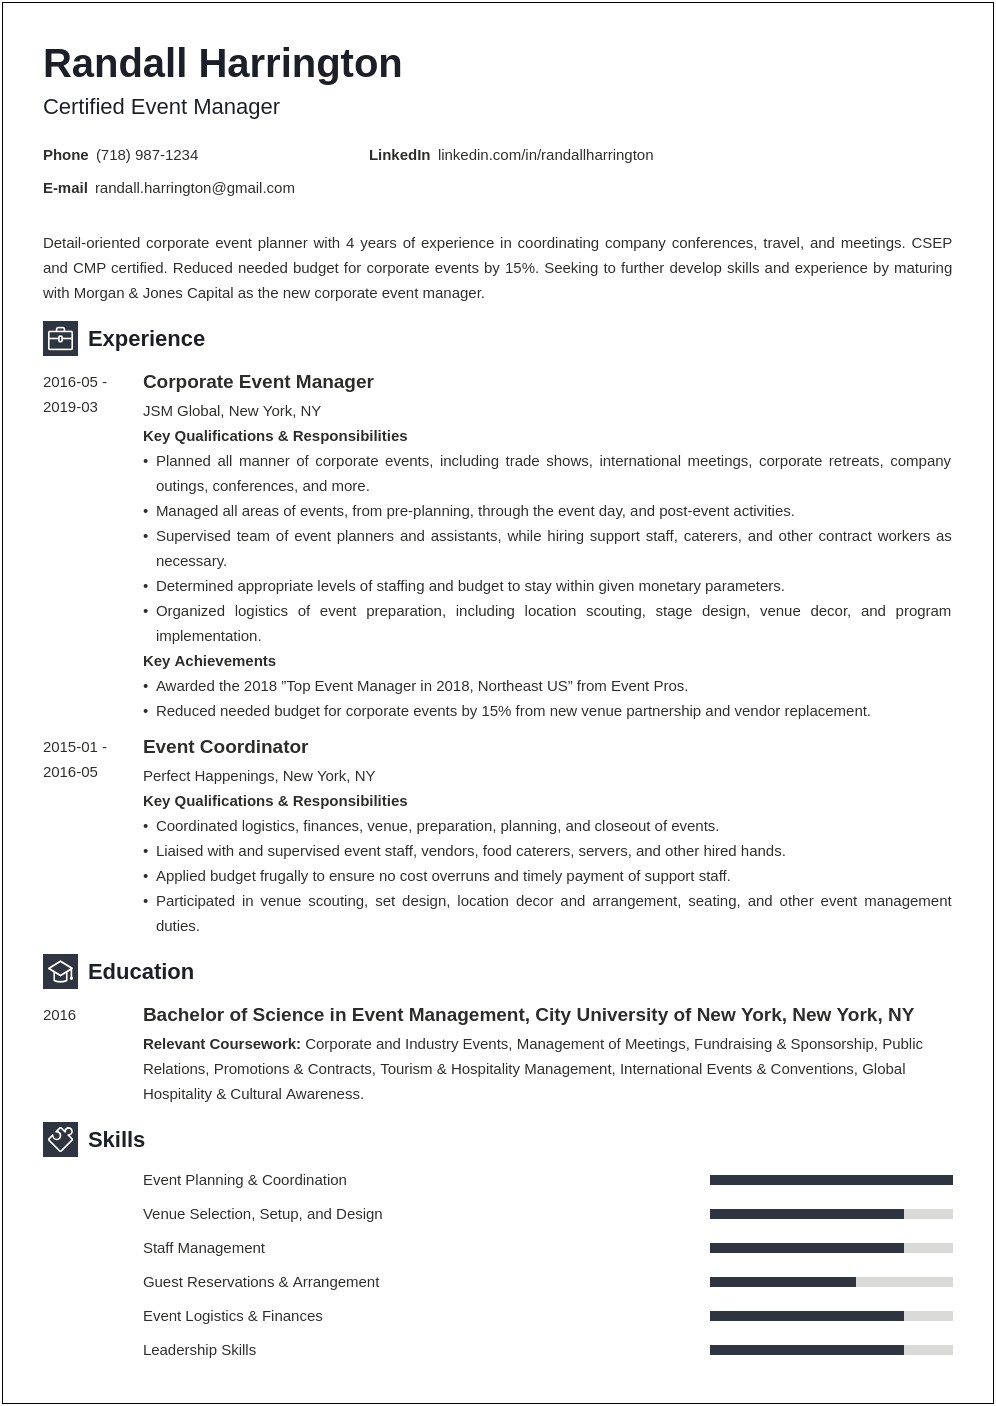 Best Summary For Event Planning Resume